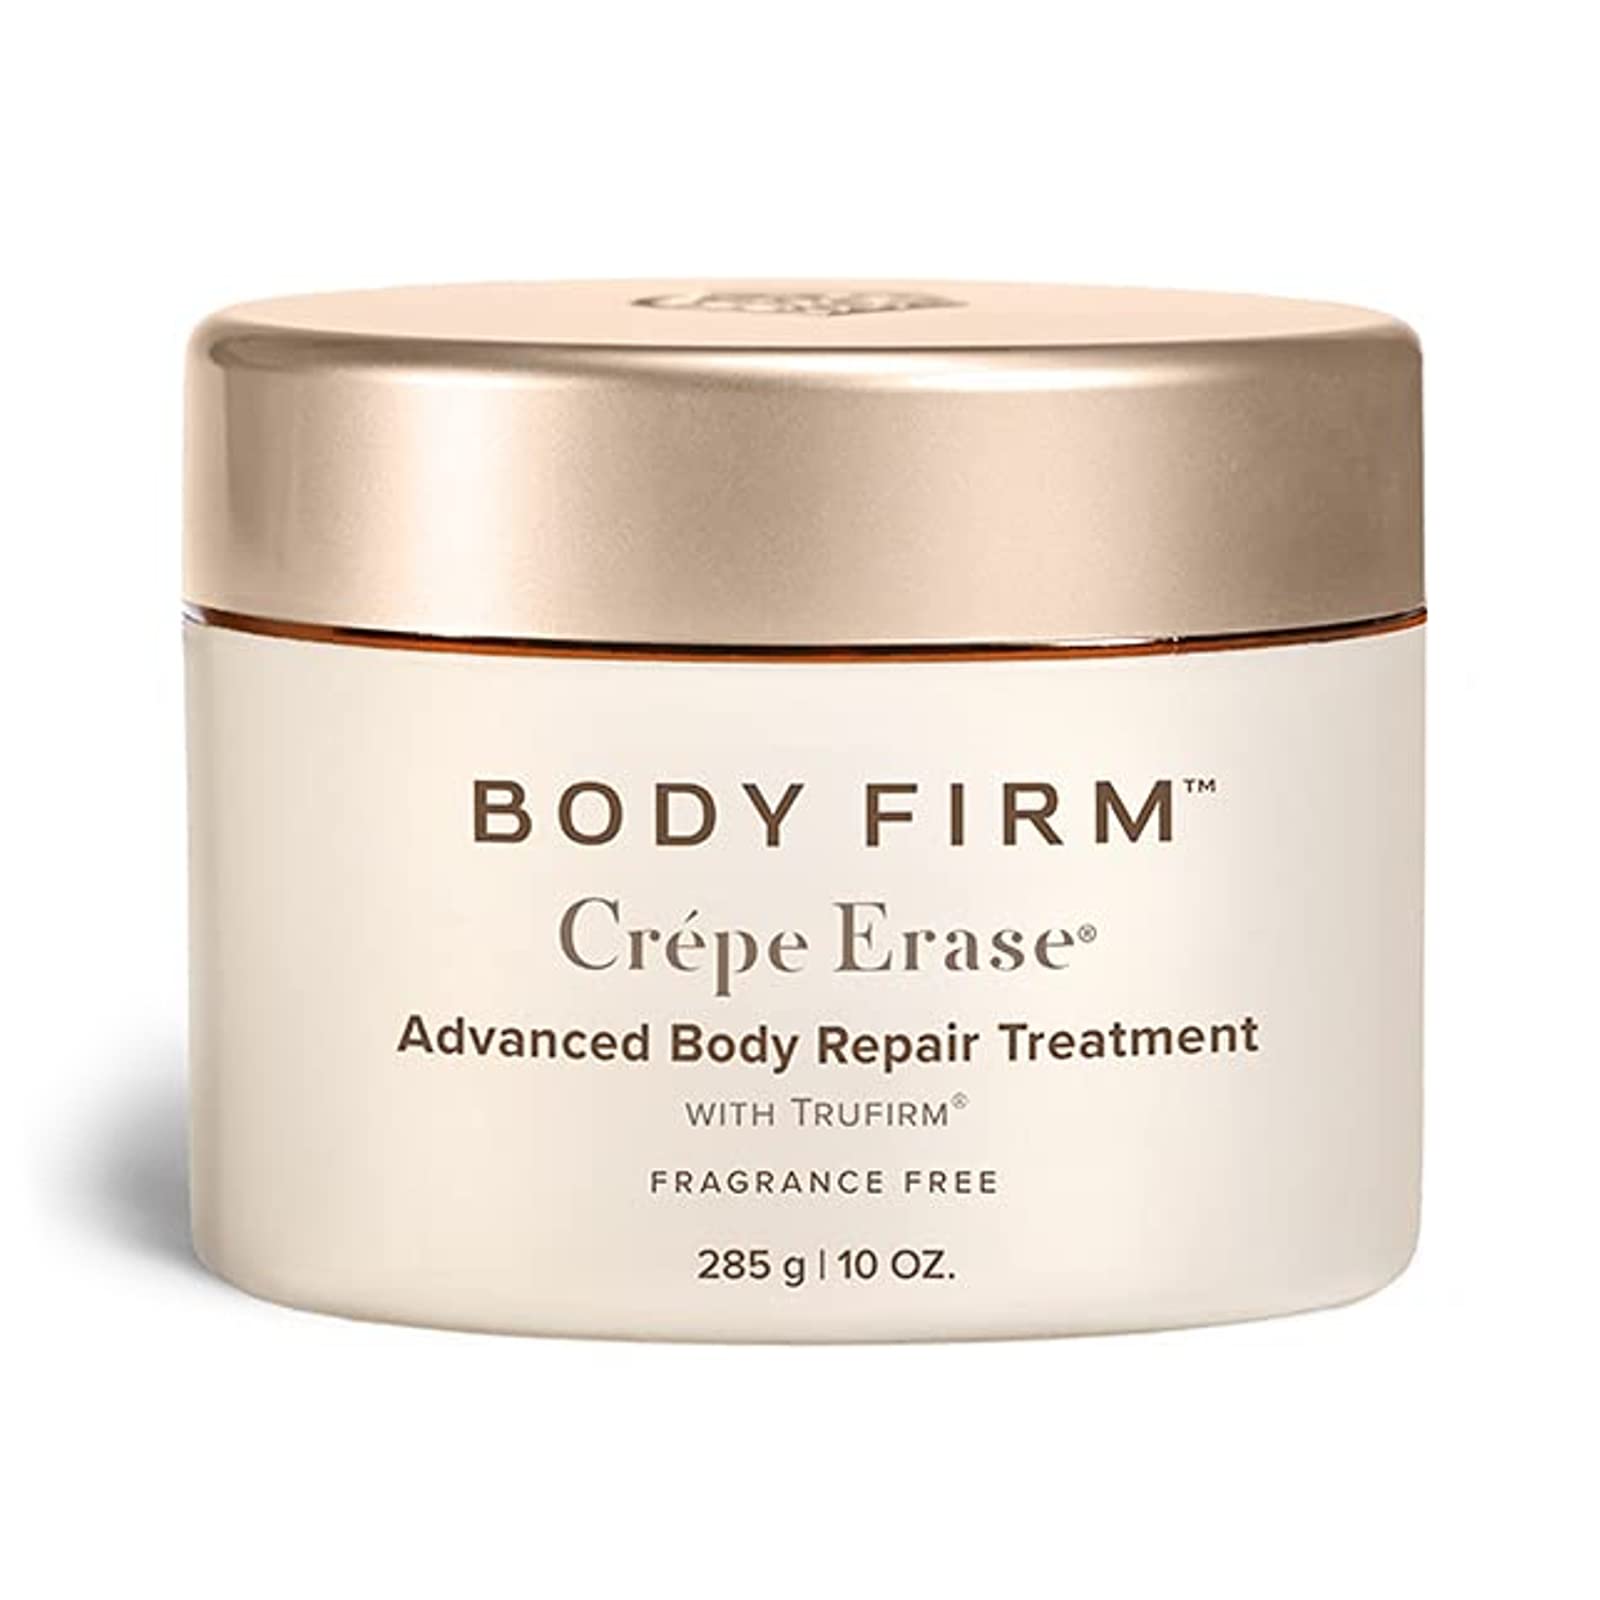 Crpe Erase Advanced Body Repair Treatment  Anti Aging Wrinkle Cream for  Face and Body, Support Skins Natural Elastin & Collagen Production - 10oz  (Fragrance Free)